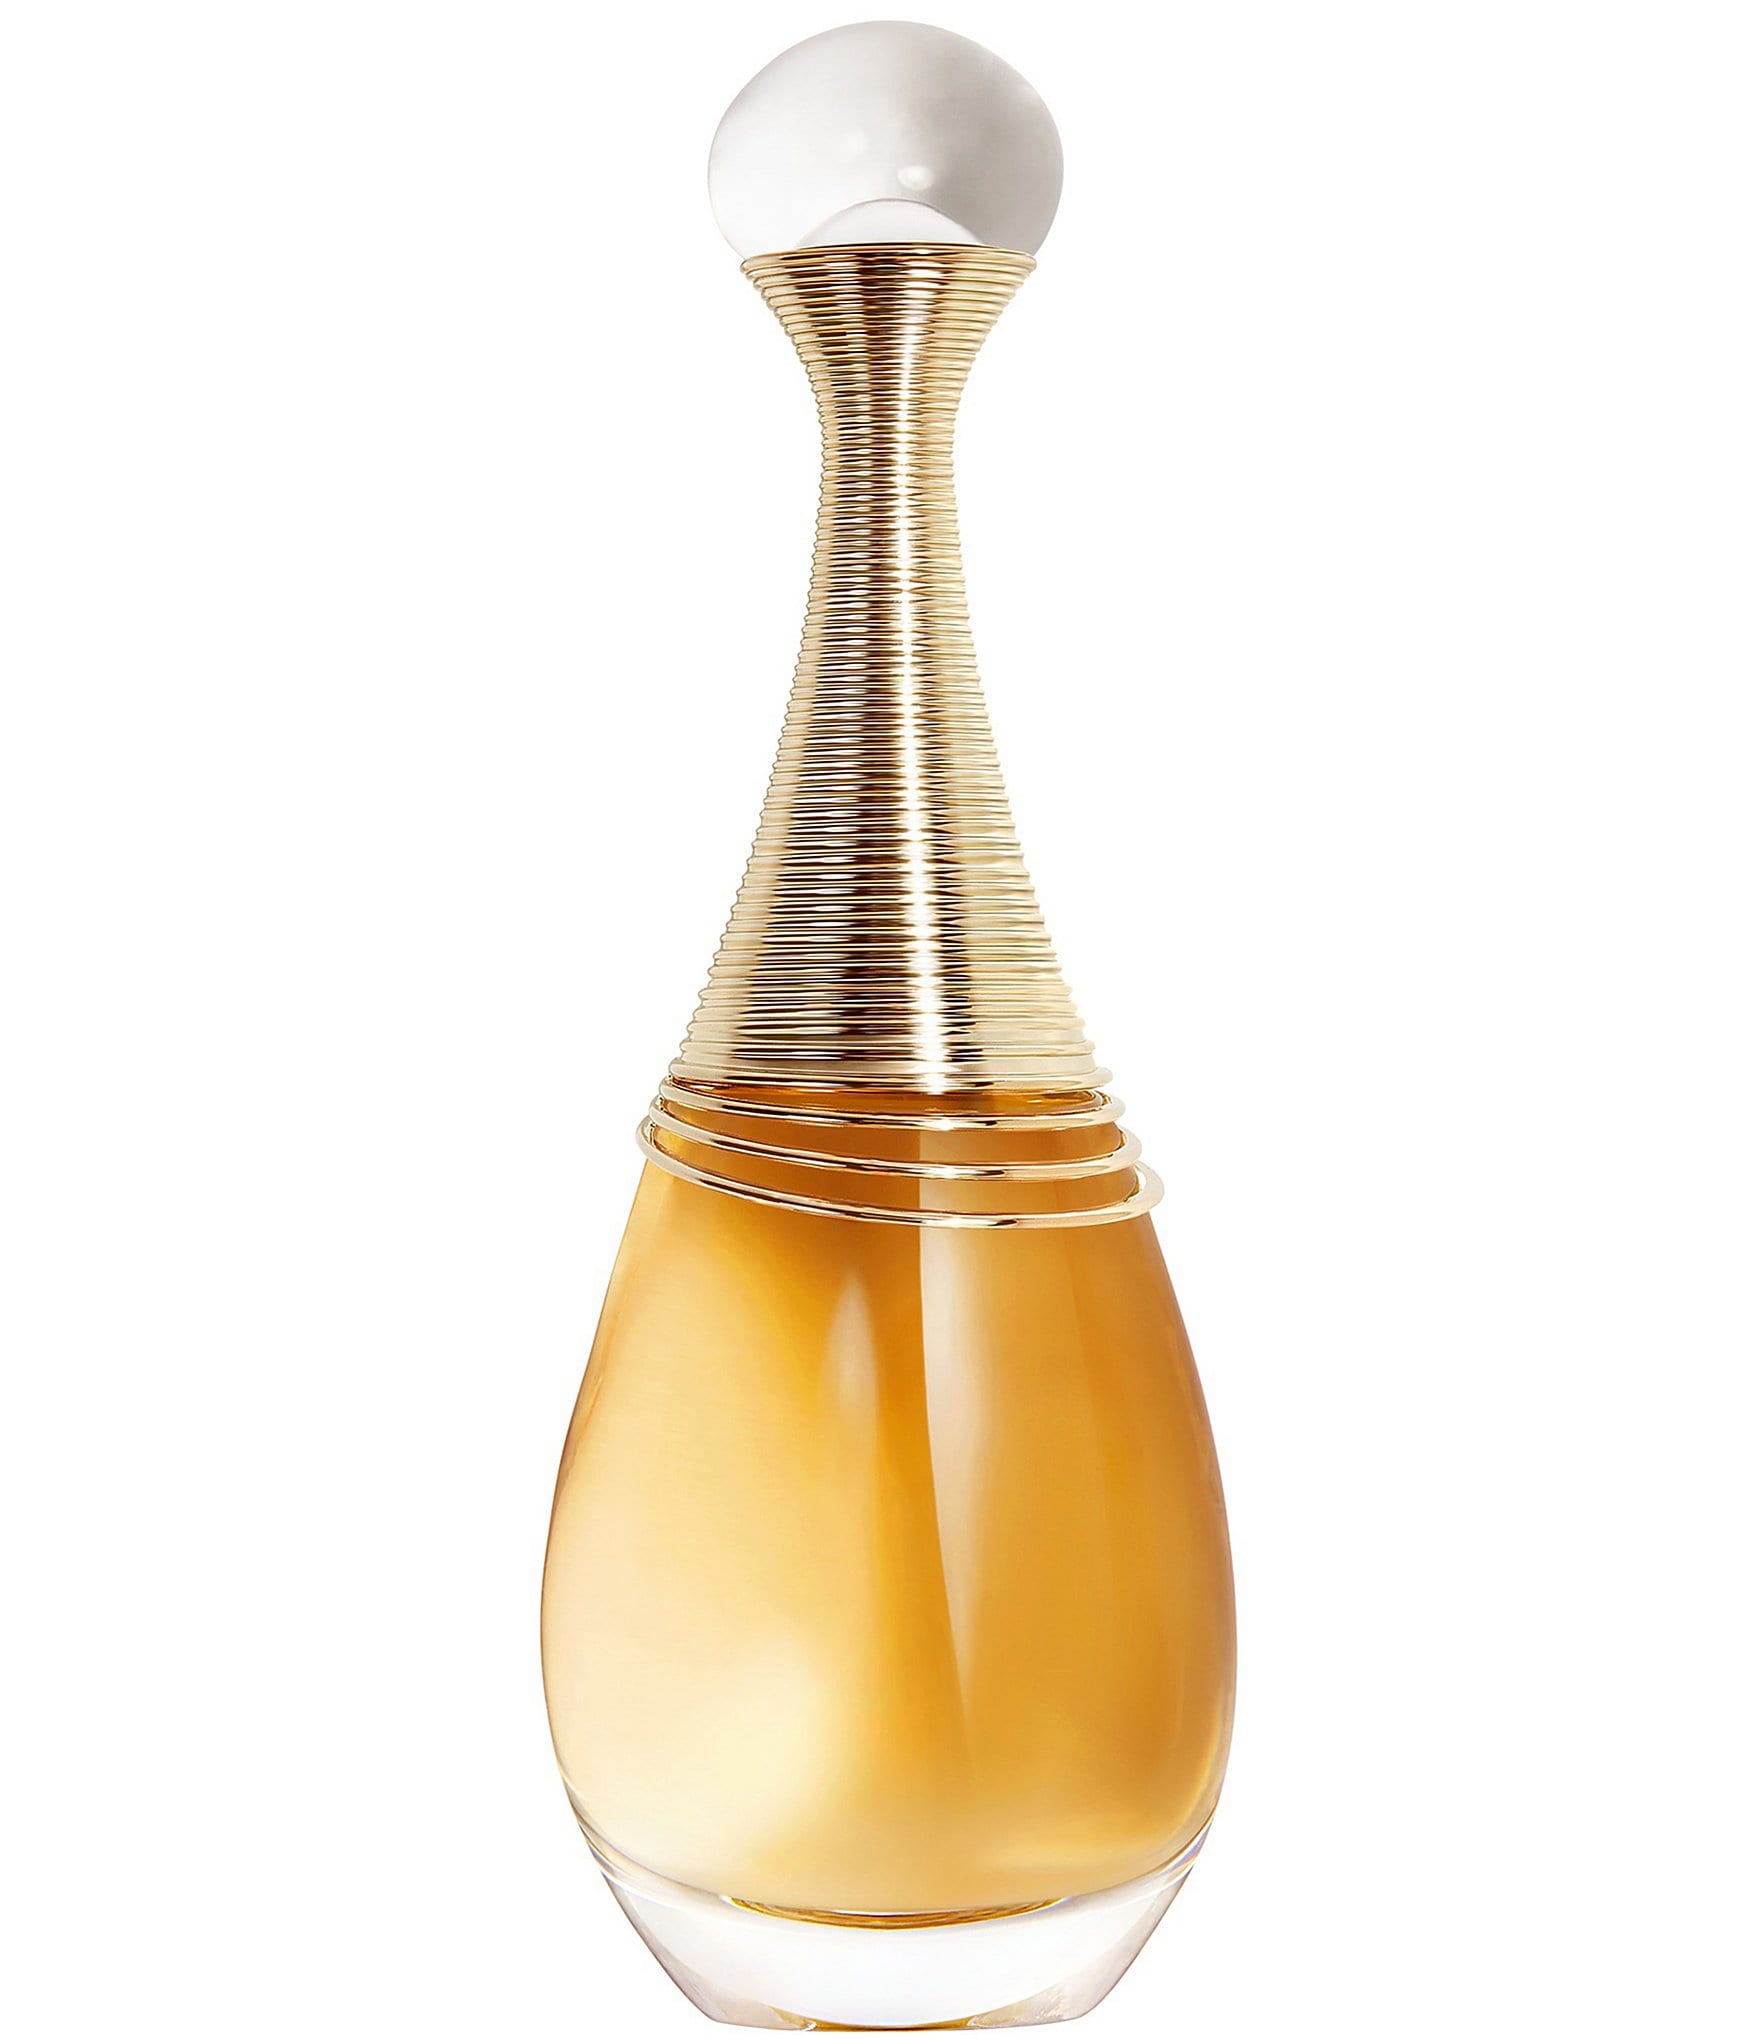 This is a gorgeous image of this Christian Dior bottle